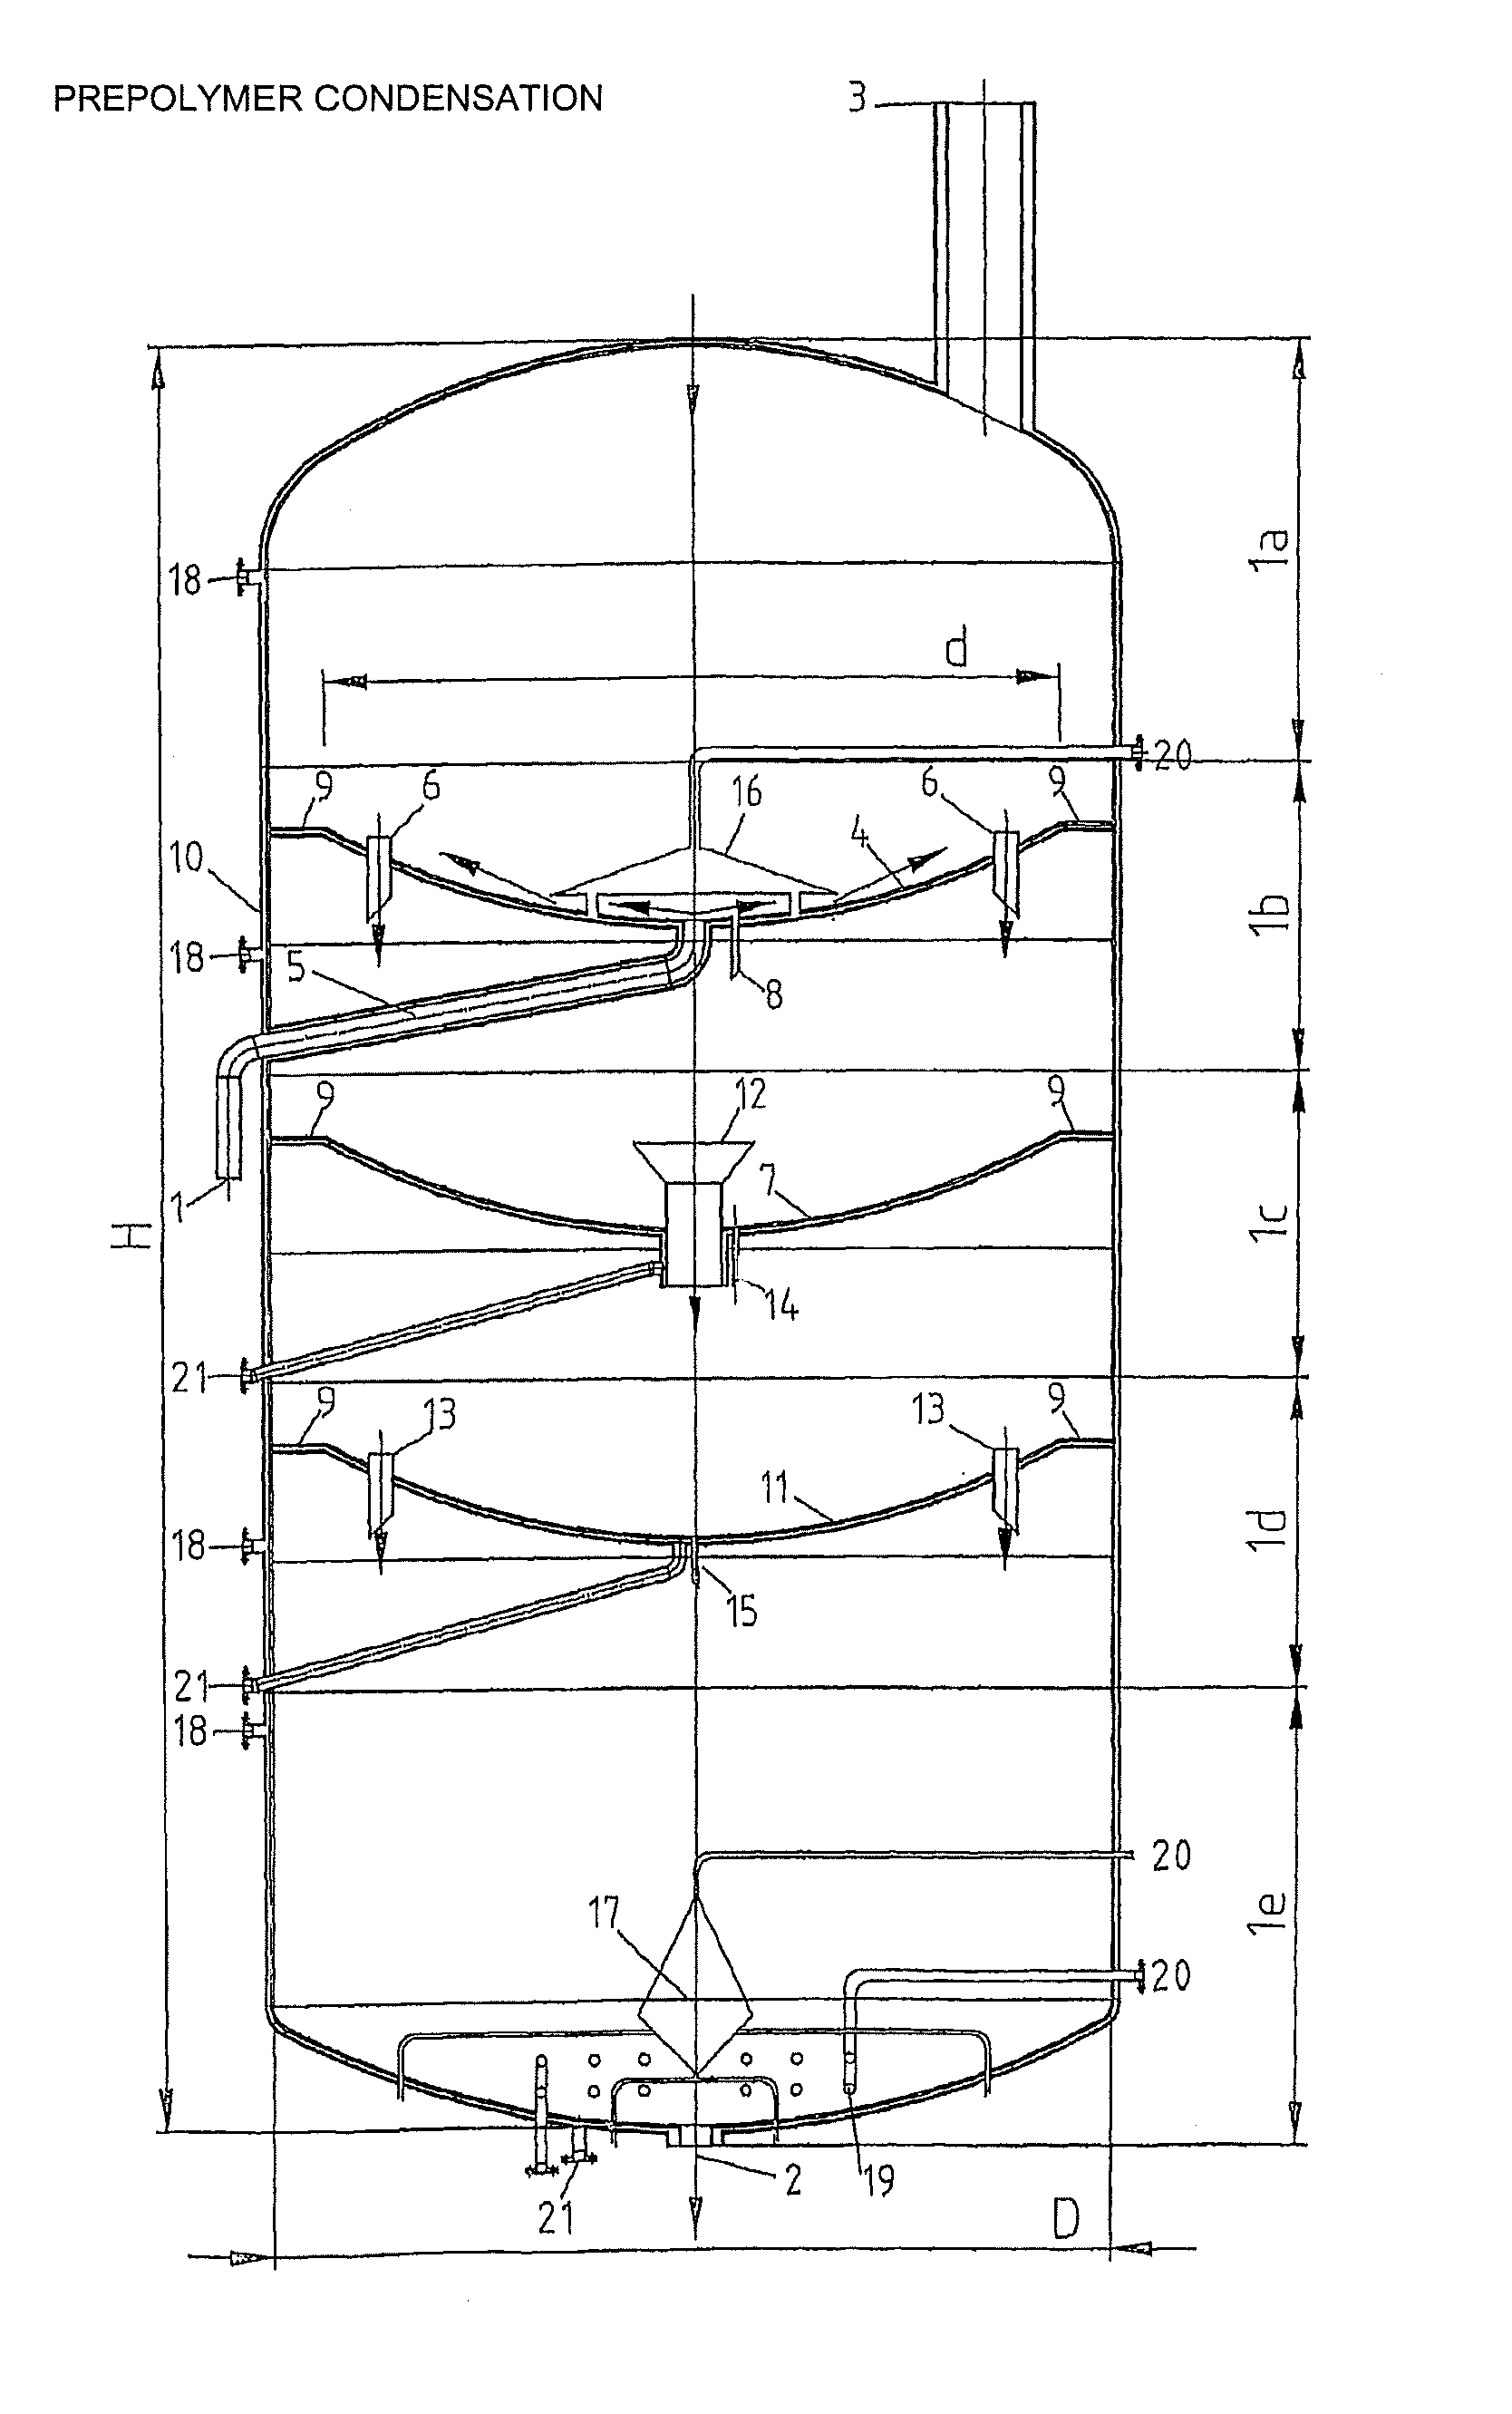 Modular device for the continuous degassing and production of polymer precondensate with high reaction product surface to volume ratio with gentle treatment of the reaction product mass